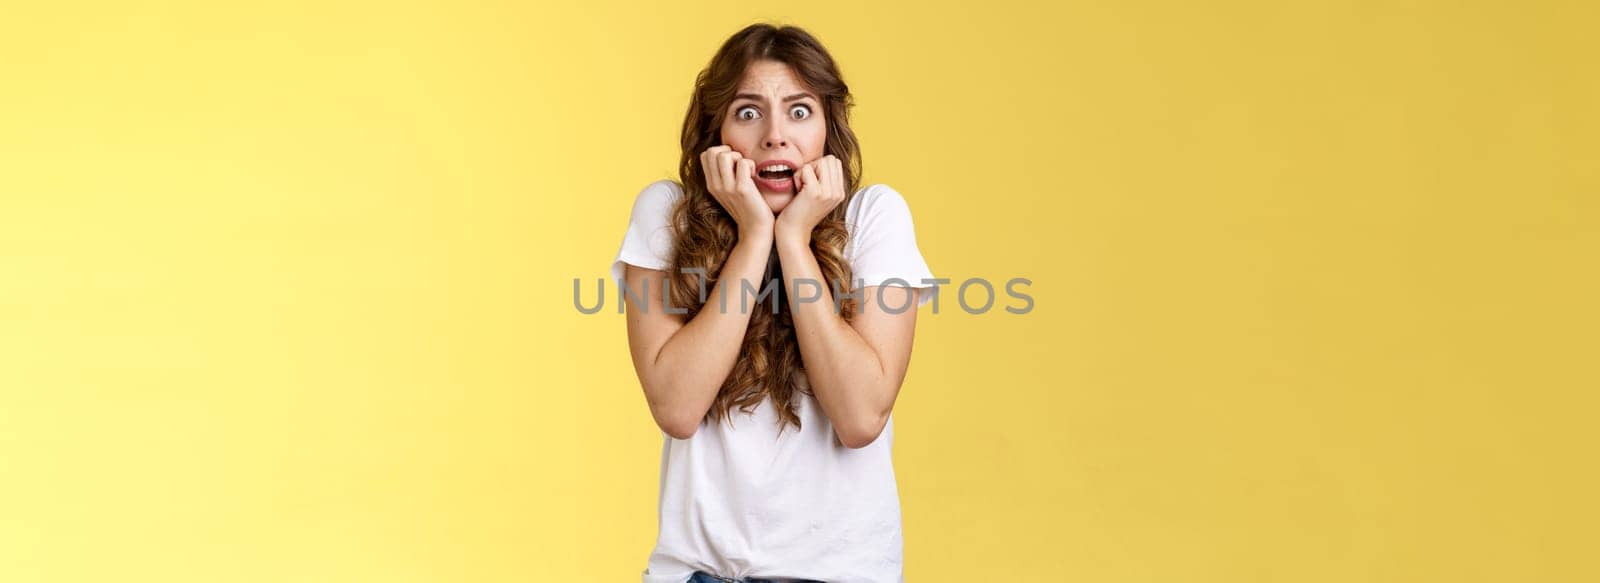 Timid insecure intense gasping young scared attractive woman sighing shocked frightened hold hands face biting nails terrified express fear standing shook yellow background stare camera by Benzoix